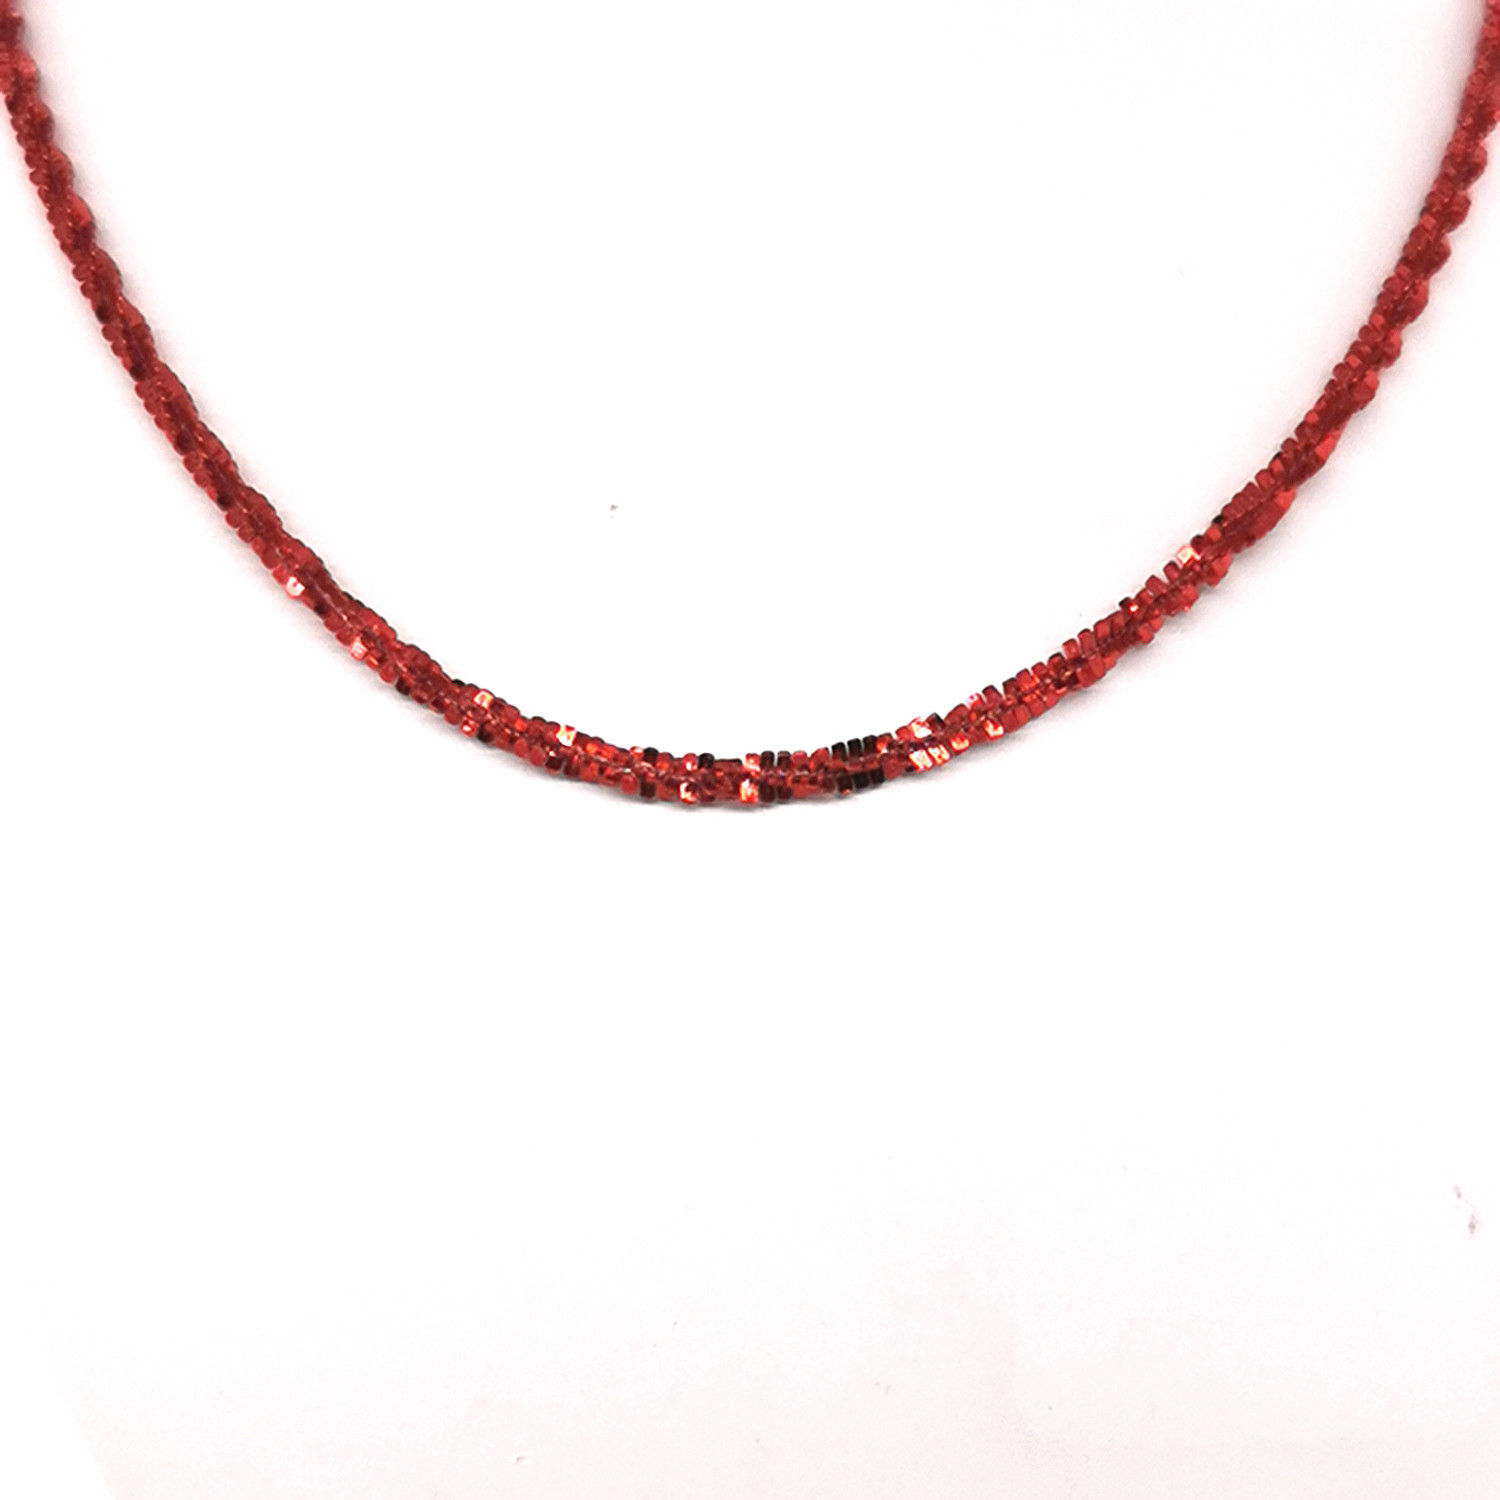 Collier Elden argent 925/1000 1 rang rouge rubis
collection Catch the Rainbow